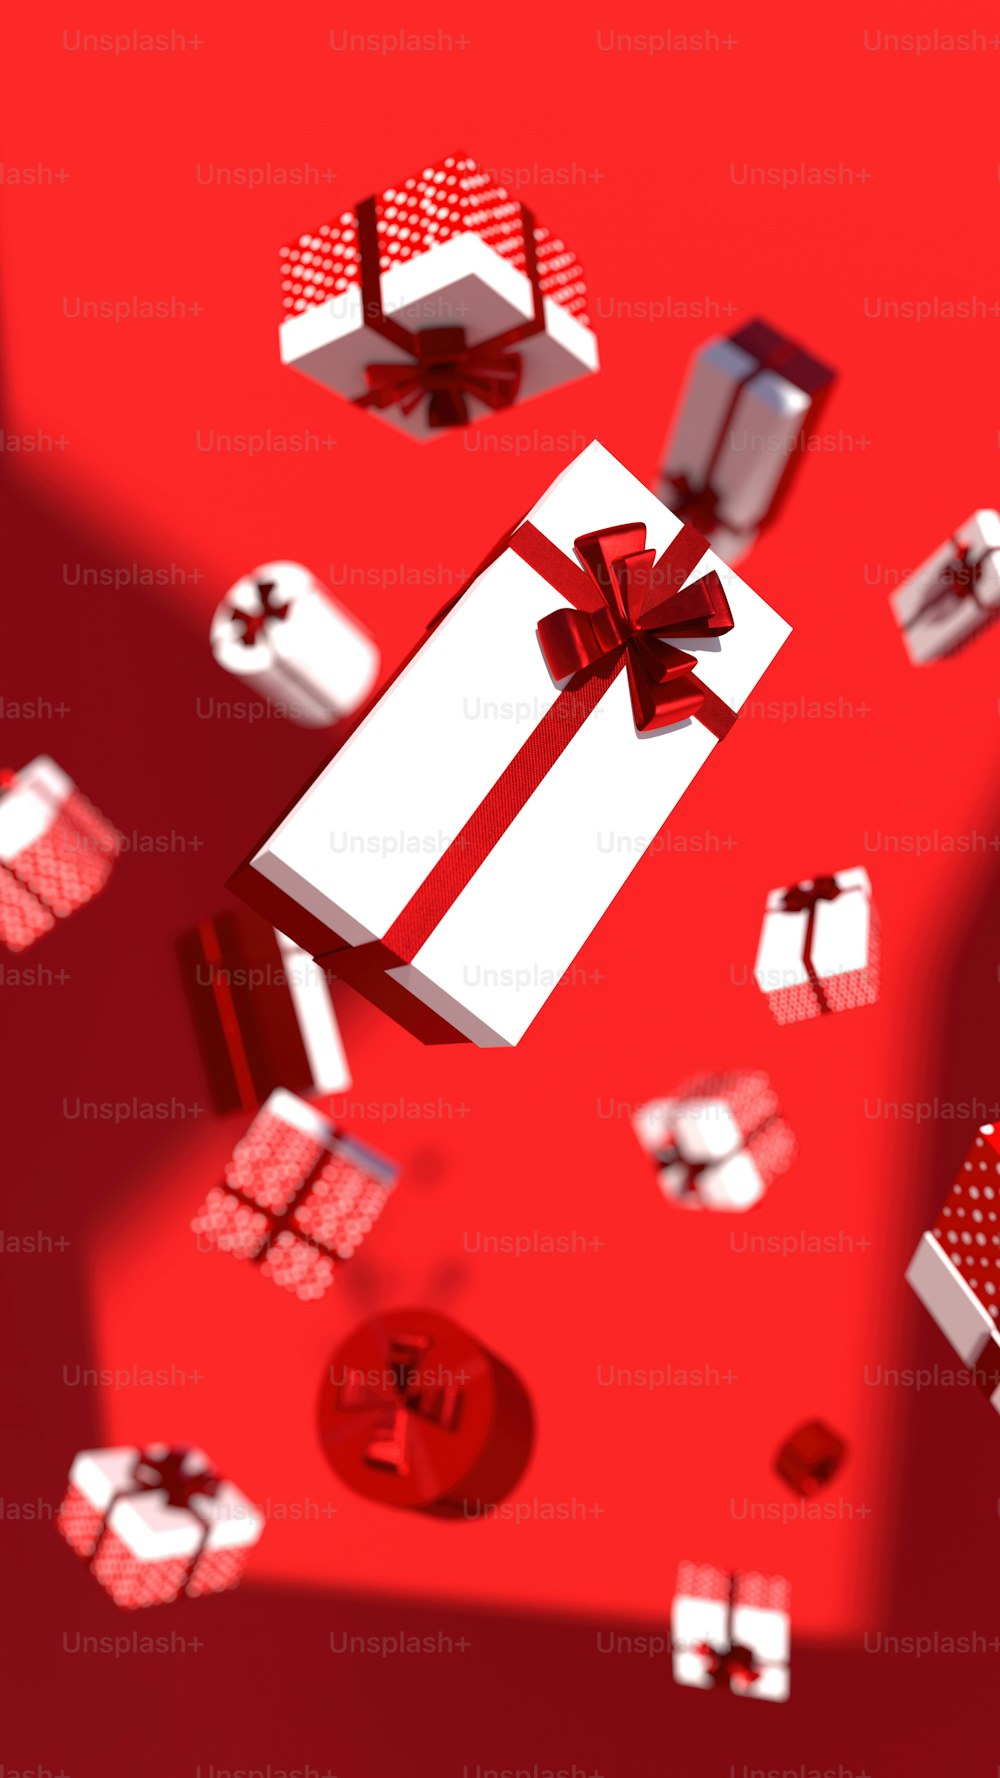 a red and white gift box with a red bow